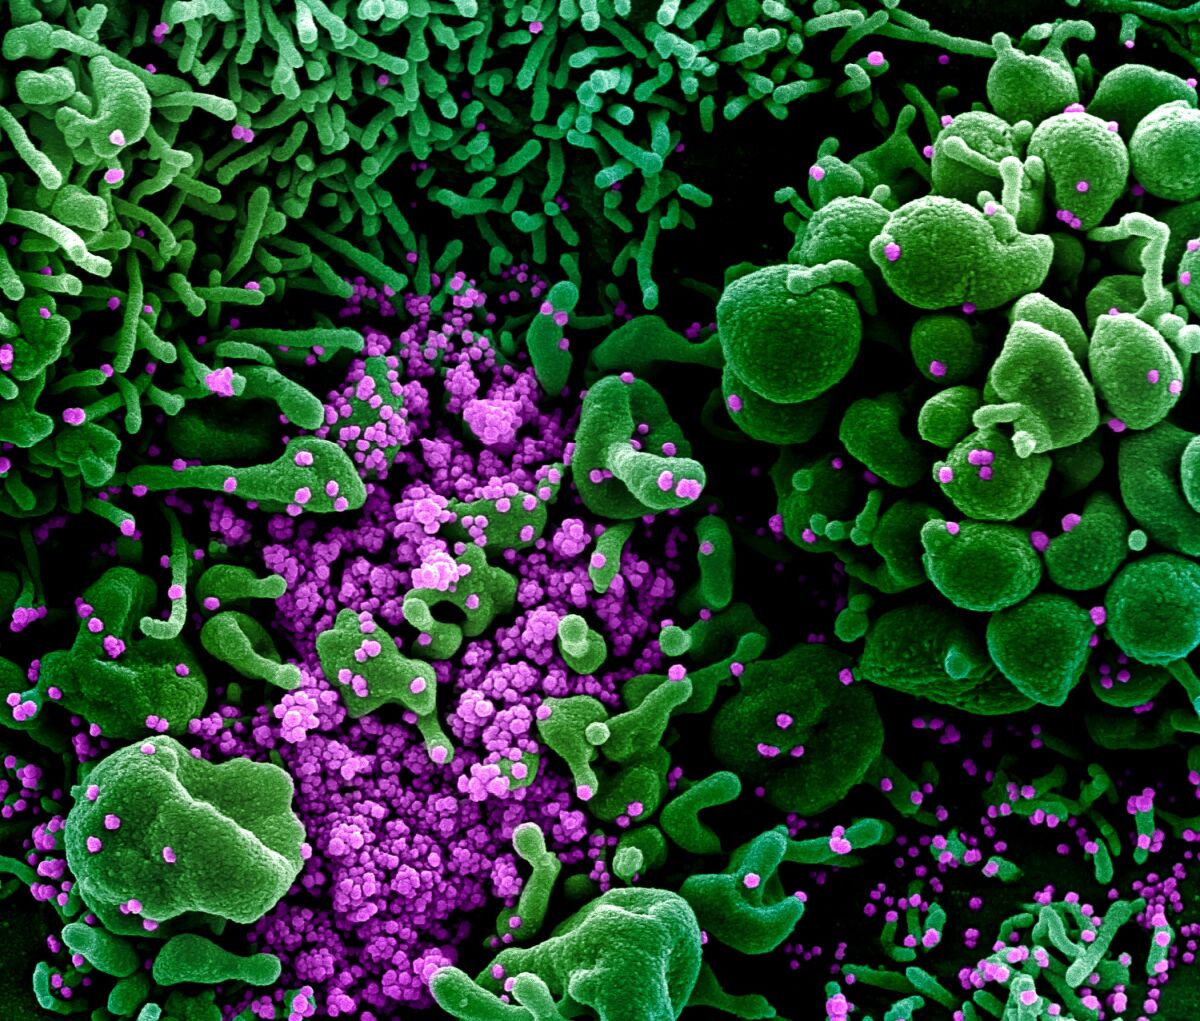 The coronavirus known as SARS-CoV-2, shown in purple, infects a cell, colored in green.